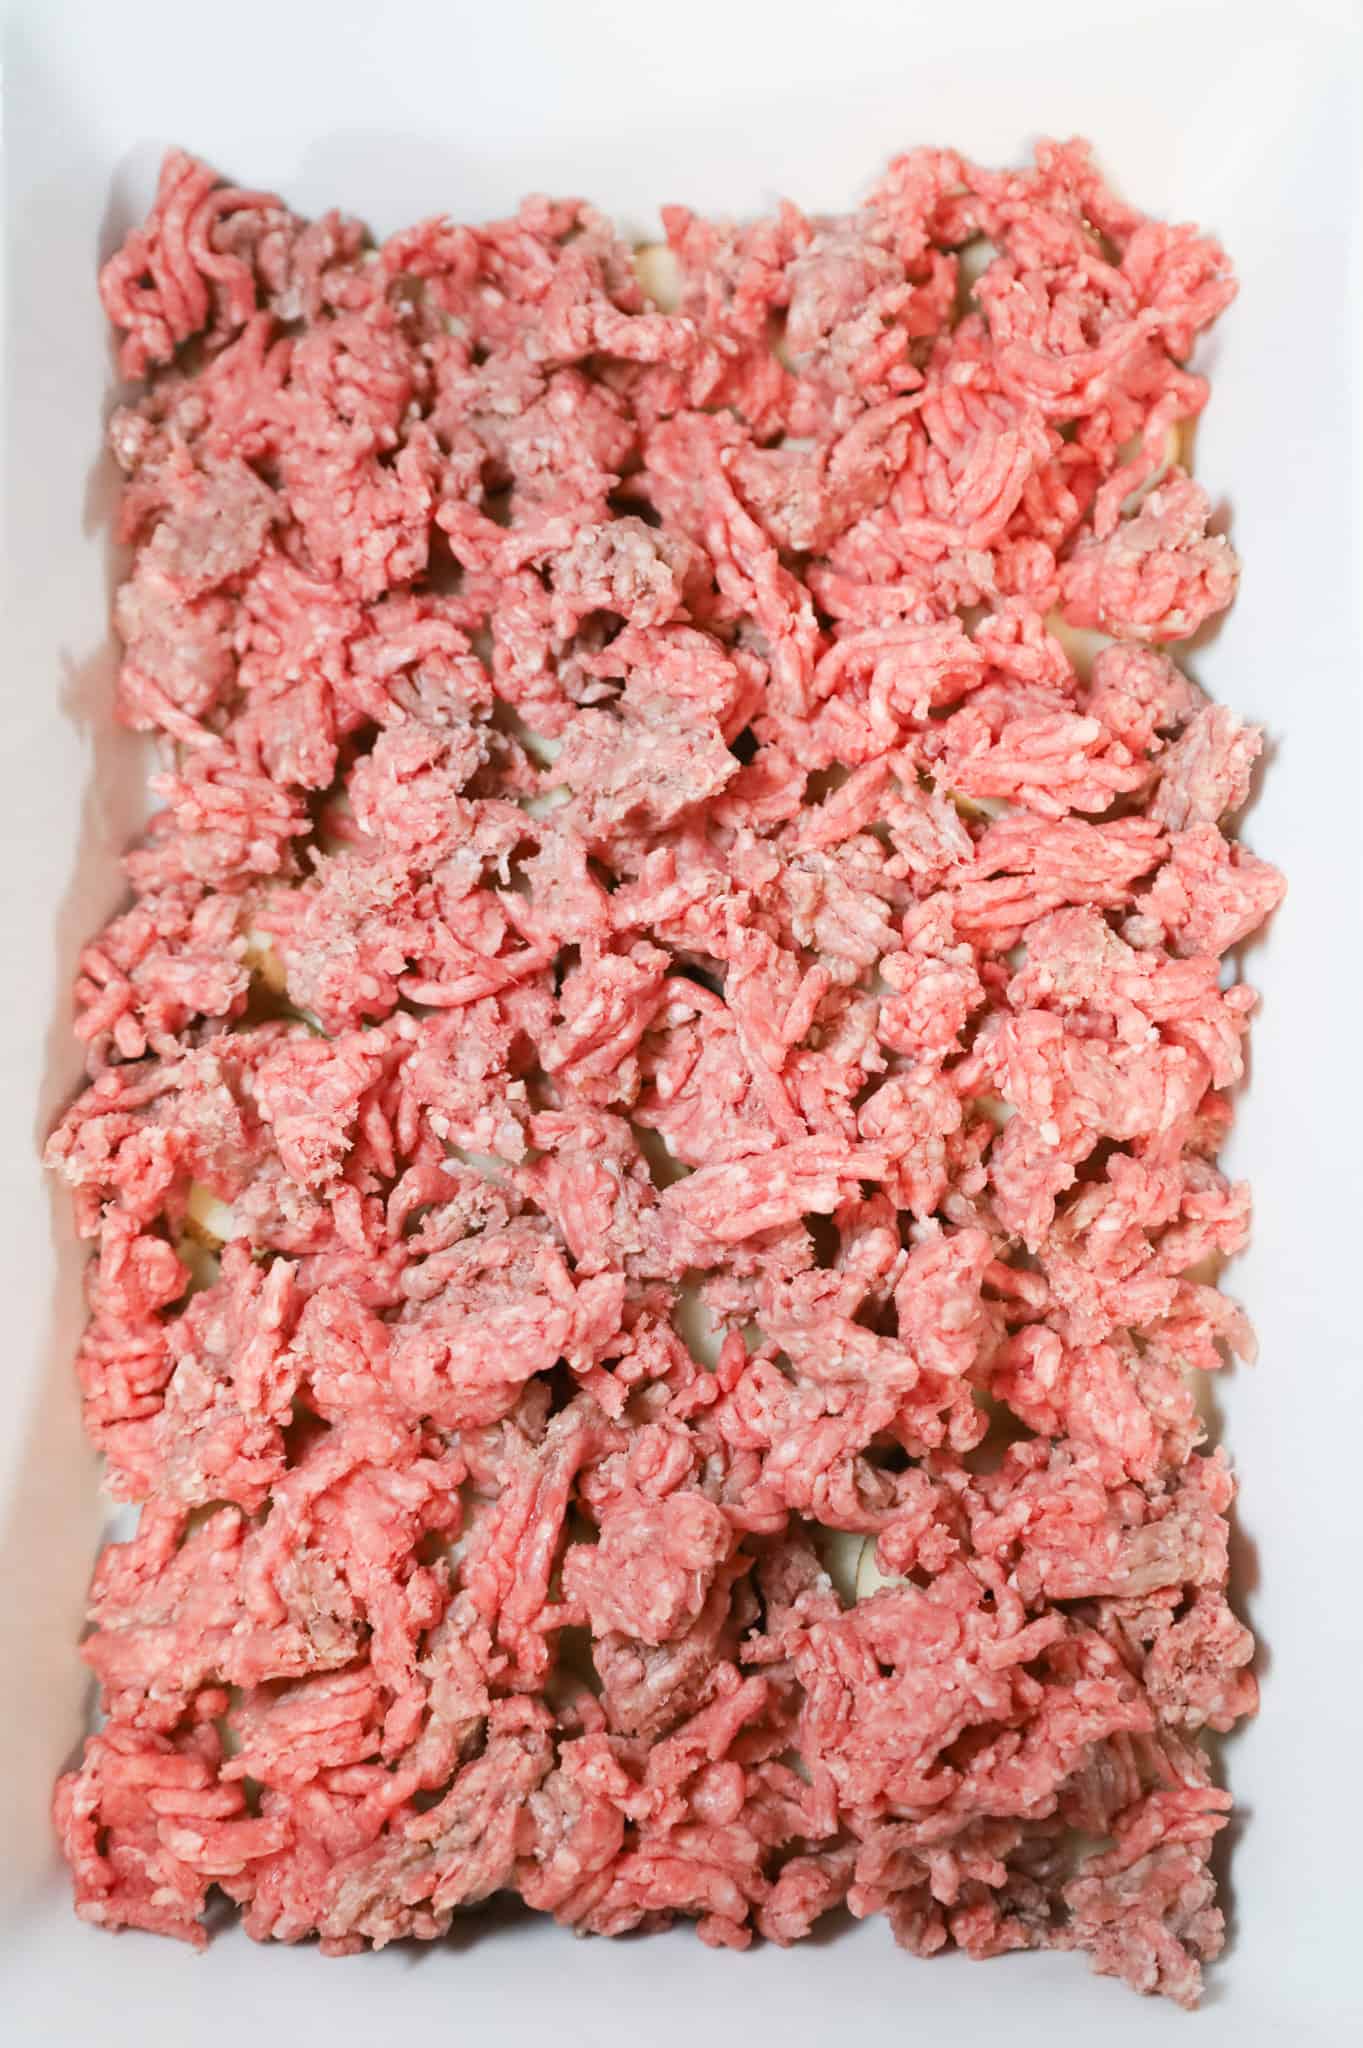 raw ground beef on top of sliced potatoes in a casserole dish